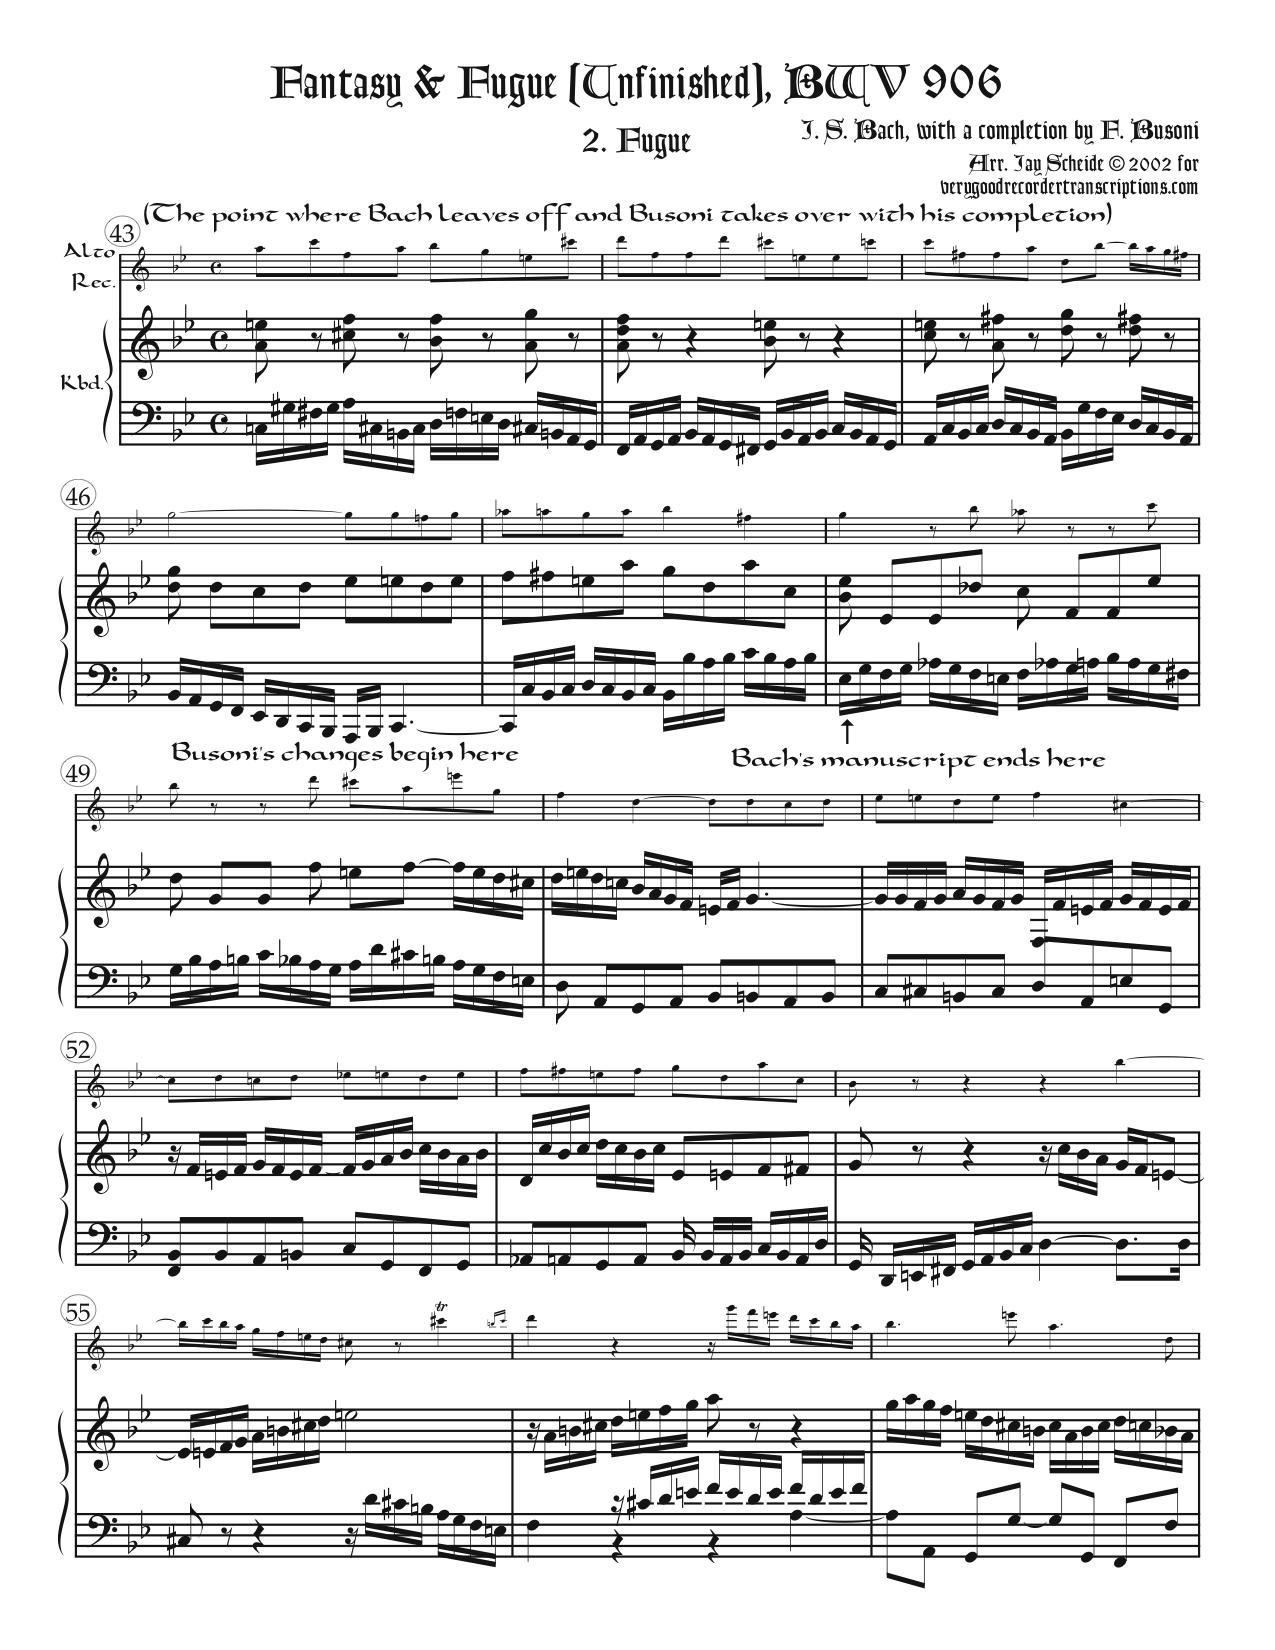 Fantasia & Fugue, BWV 906, with a completion by F. Busoni